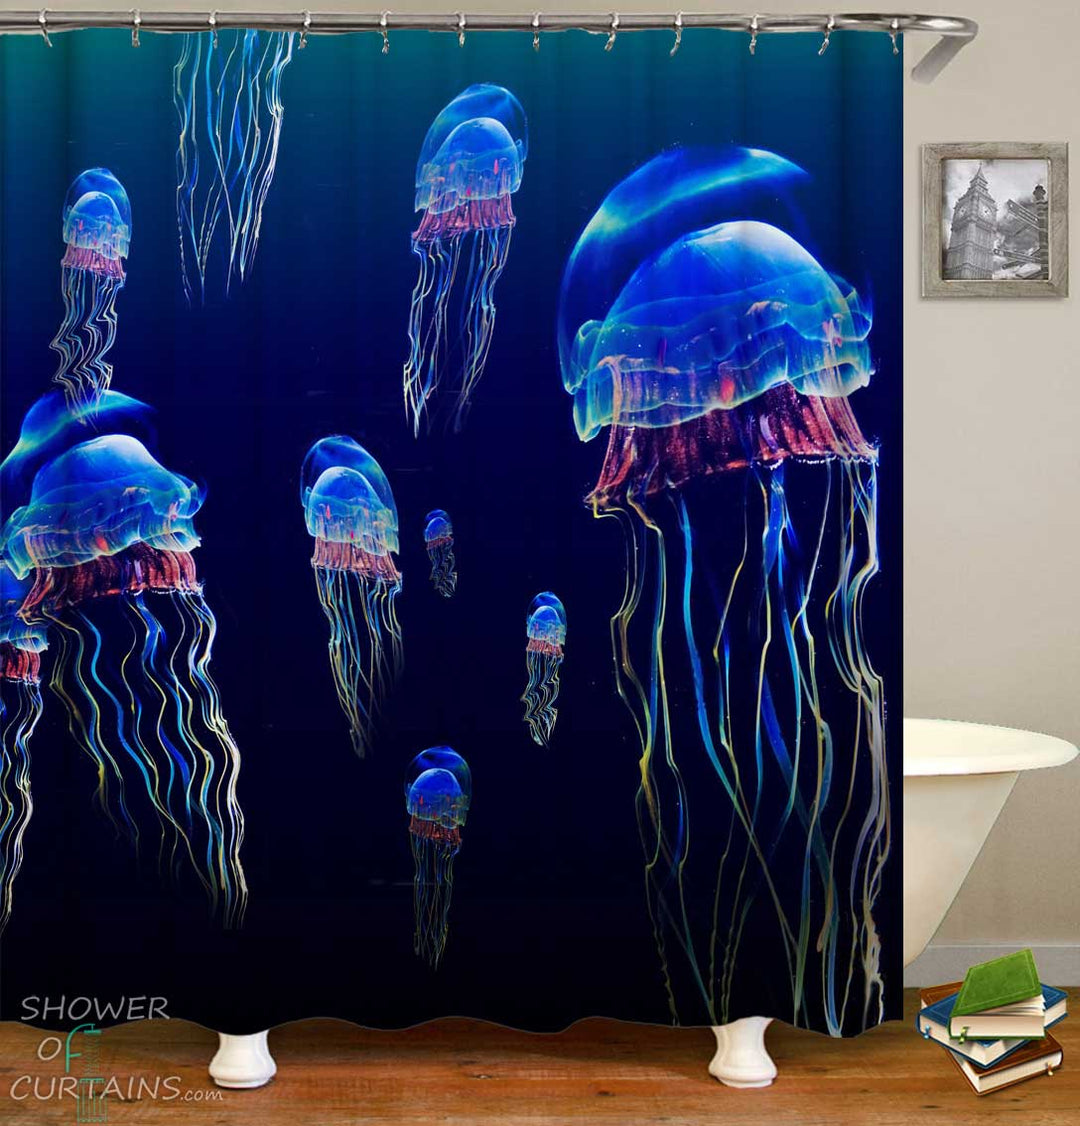 Shower Curtains with Deep Ocean Jellyfish